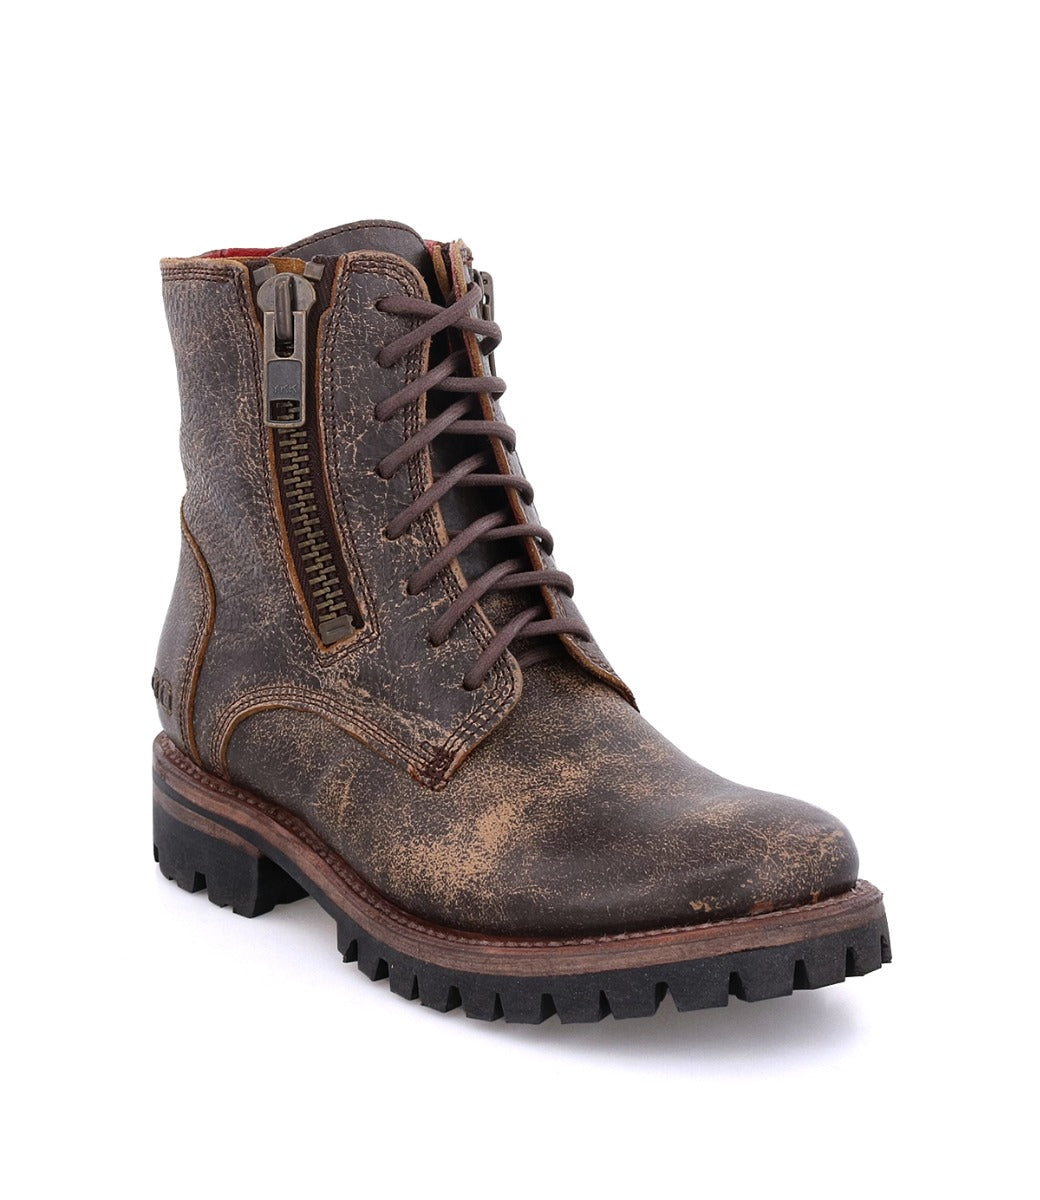 A Tactic Trek men's brown leather boot with a zipper on the side by Bed Stu.